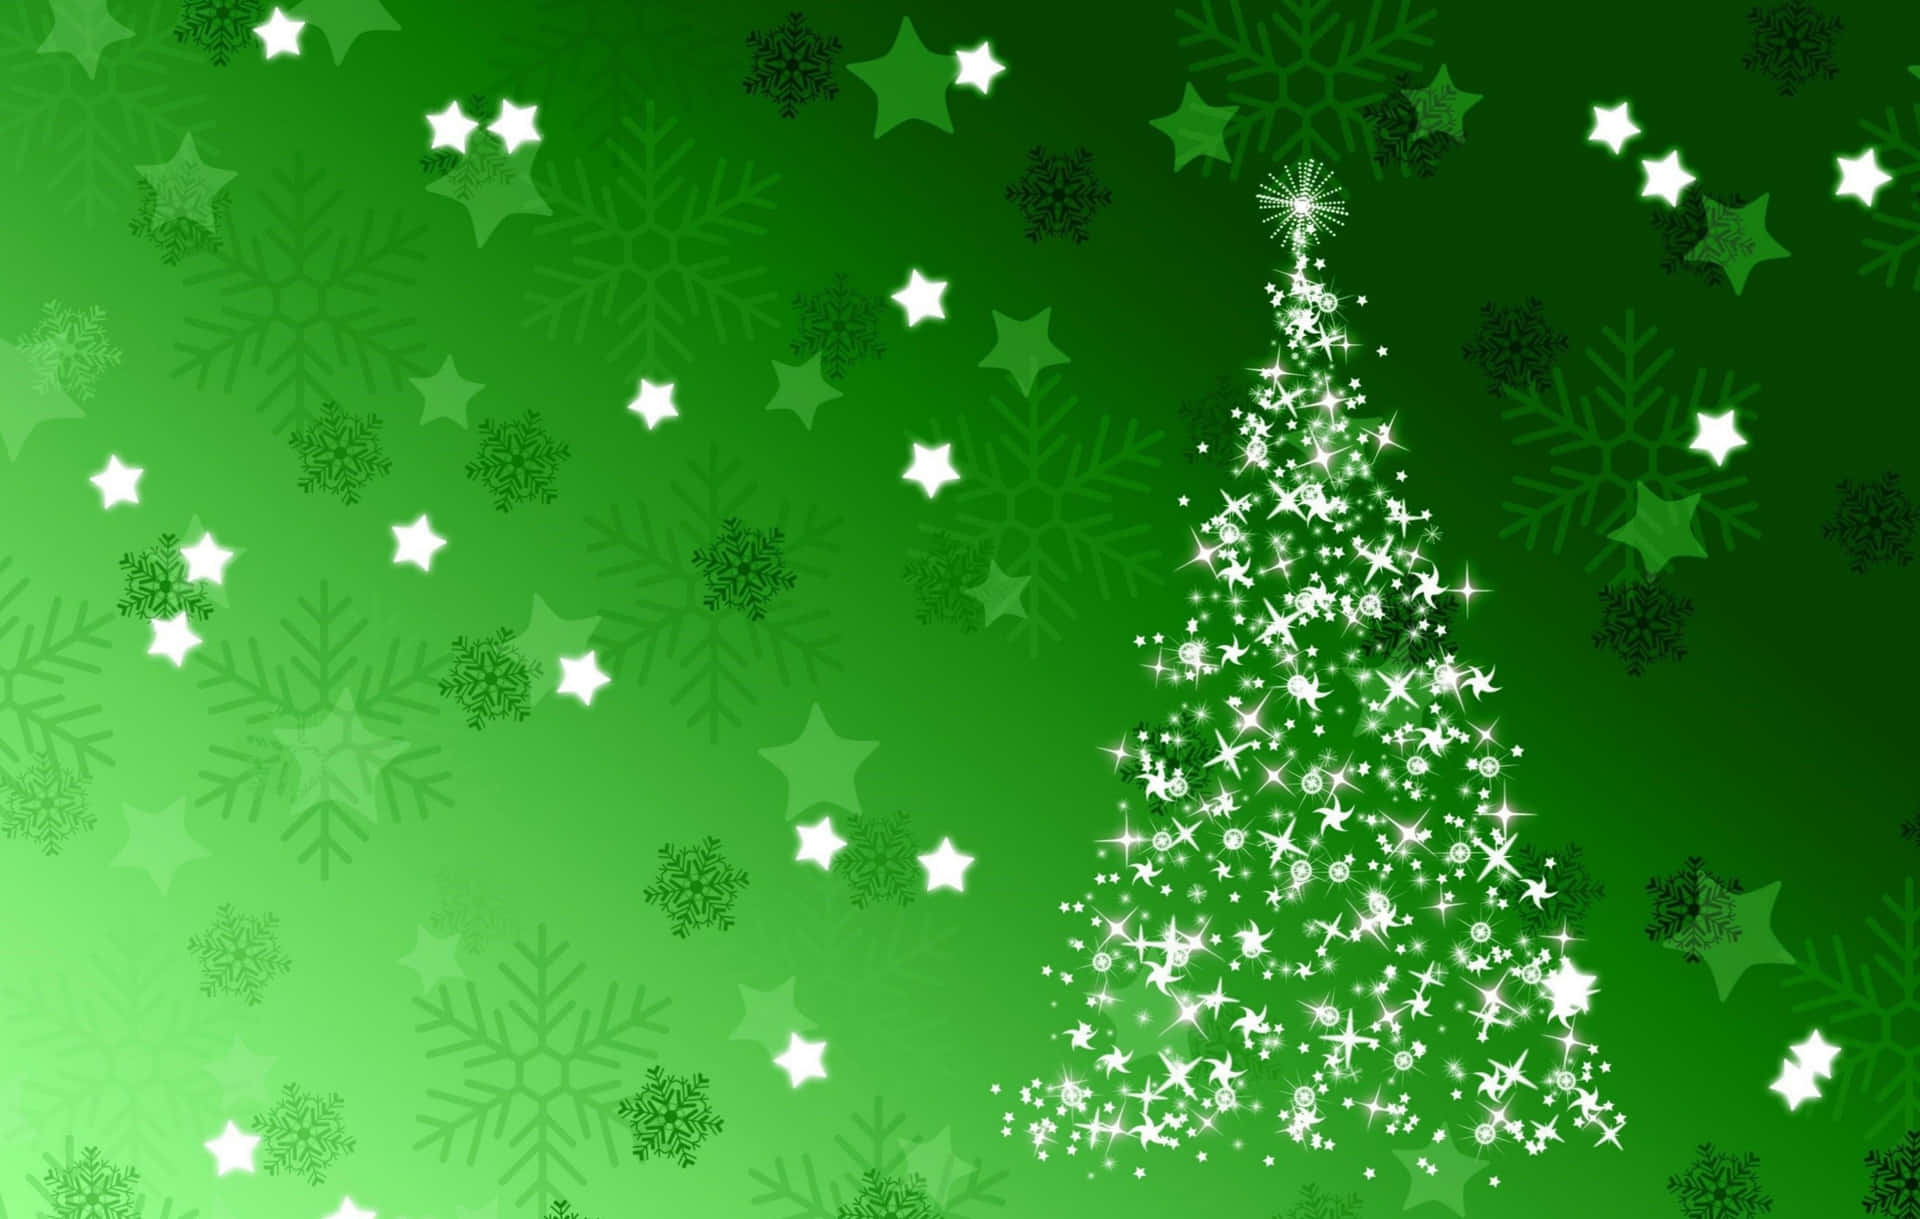 A Green Christmas: Full of Joy and Laughter Wallpaper